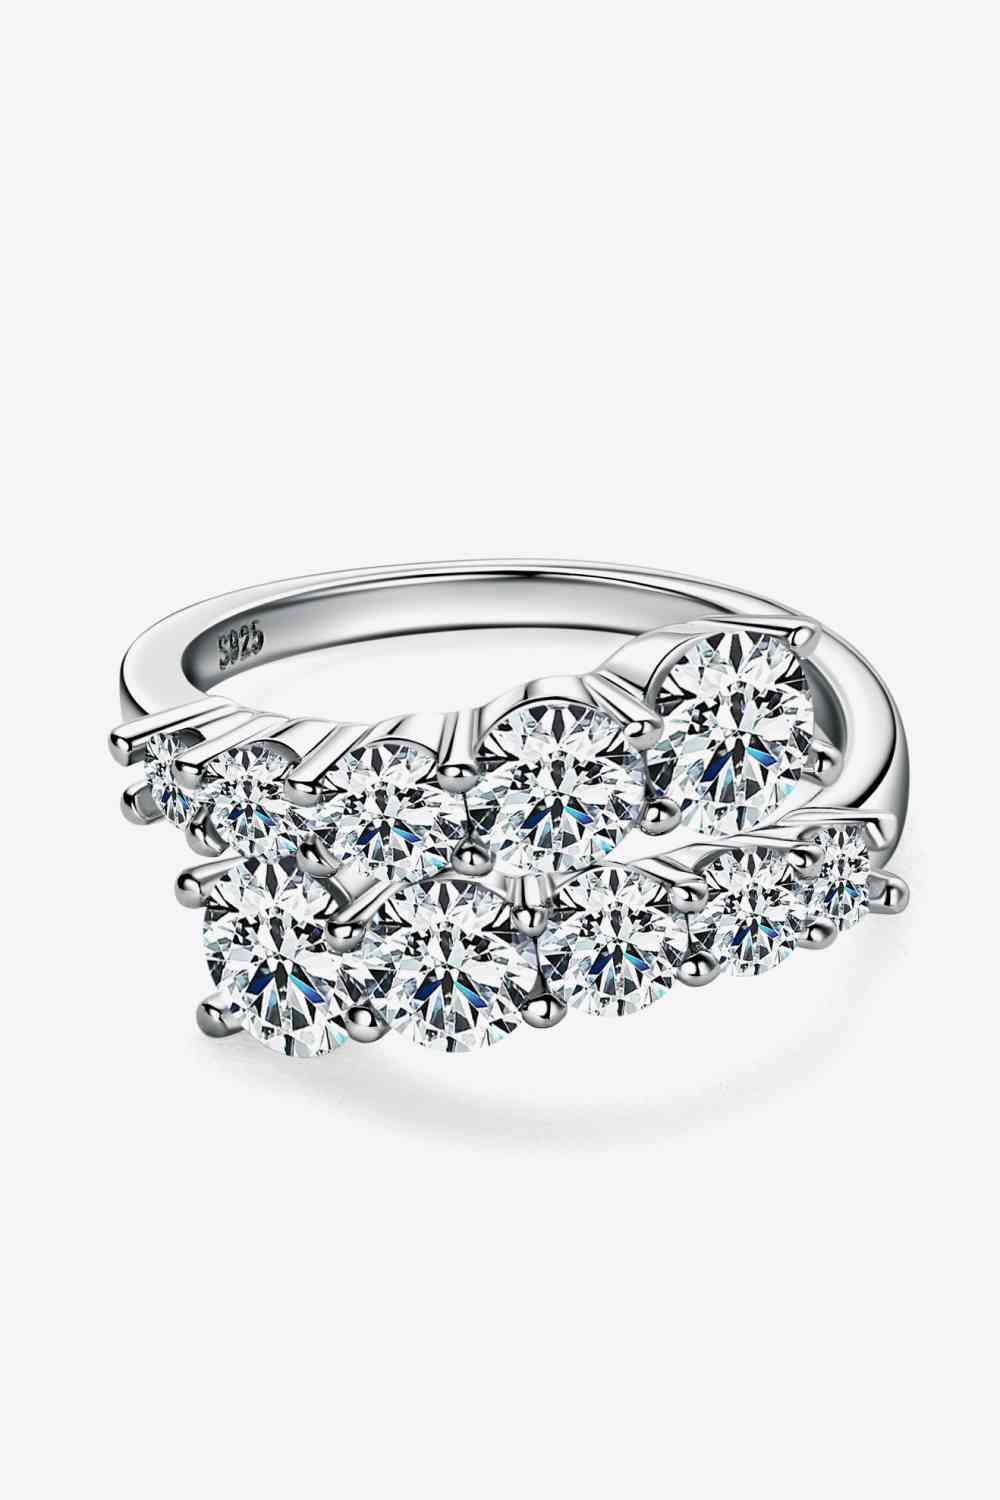 PREORDER- Adored Moissanite 925 Sterling Silver Ring